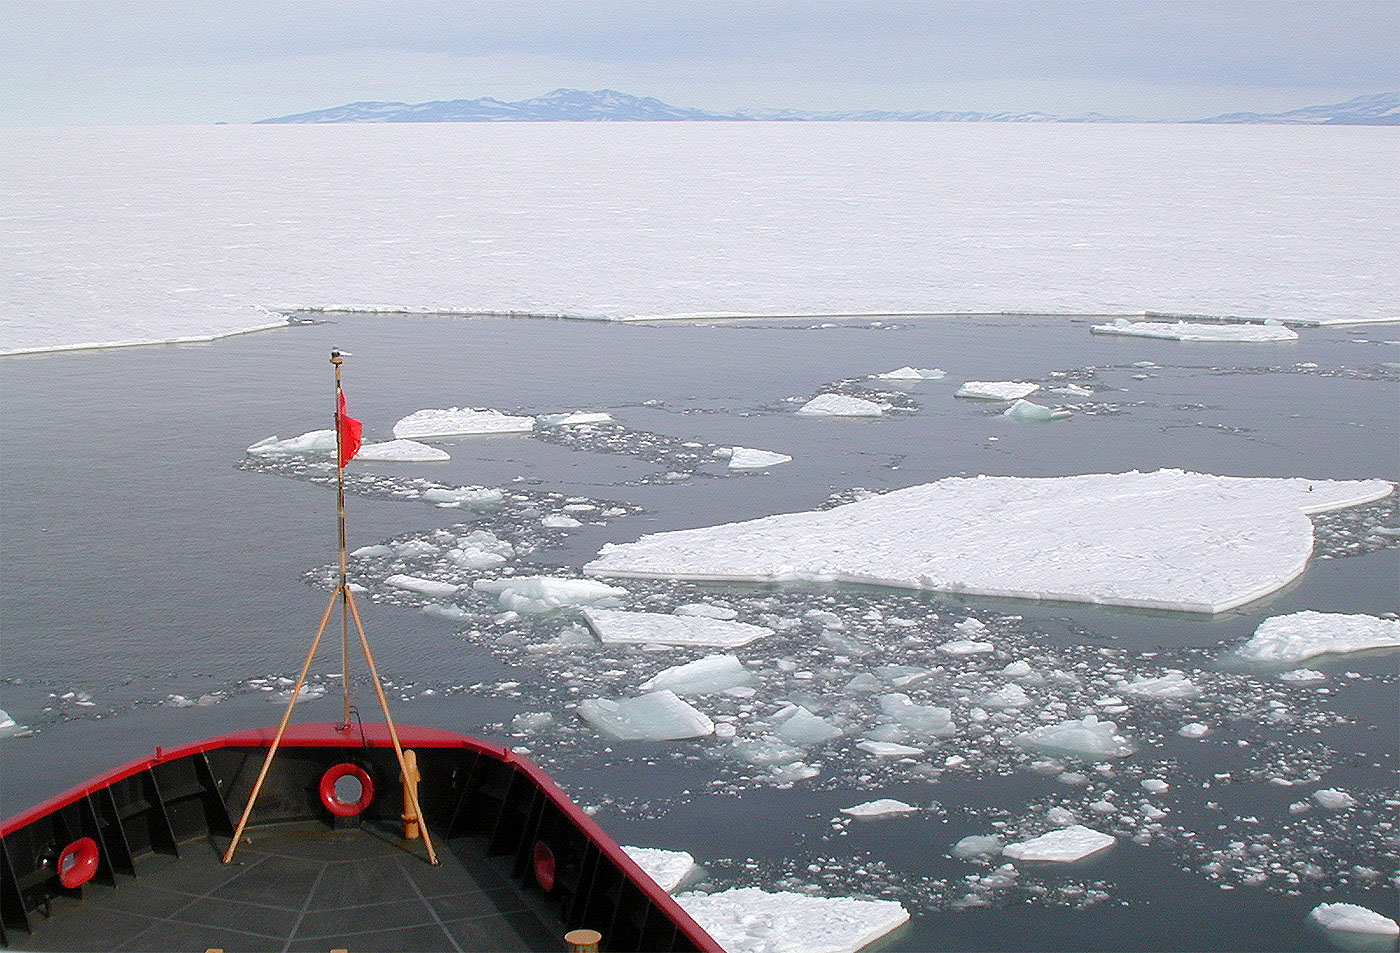 the icebreaker approaches the ice edge